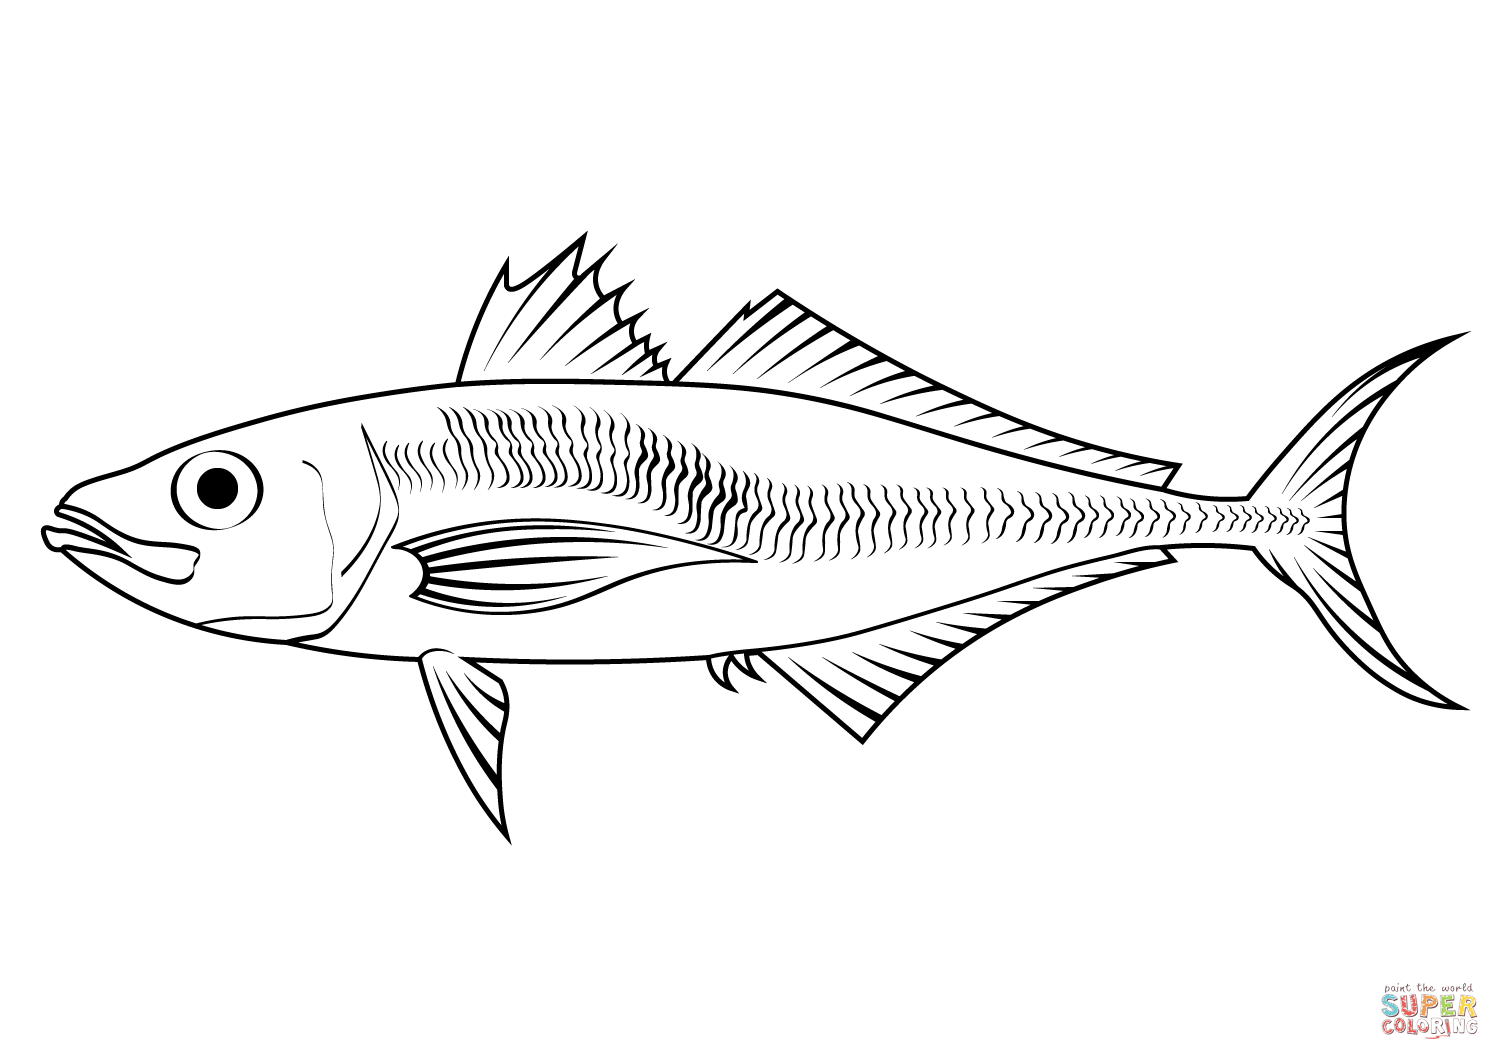 Japanese jack mackerel trachurus japonicus coloring page free printable coloring pages